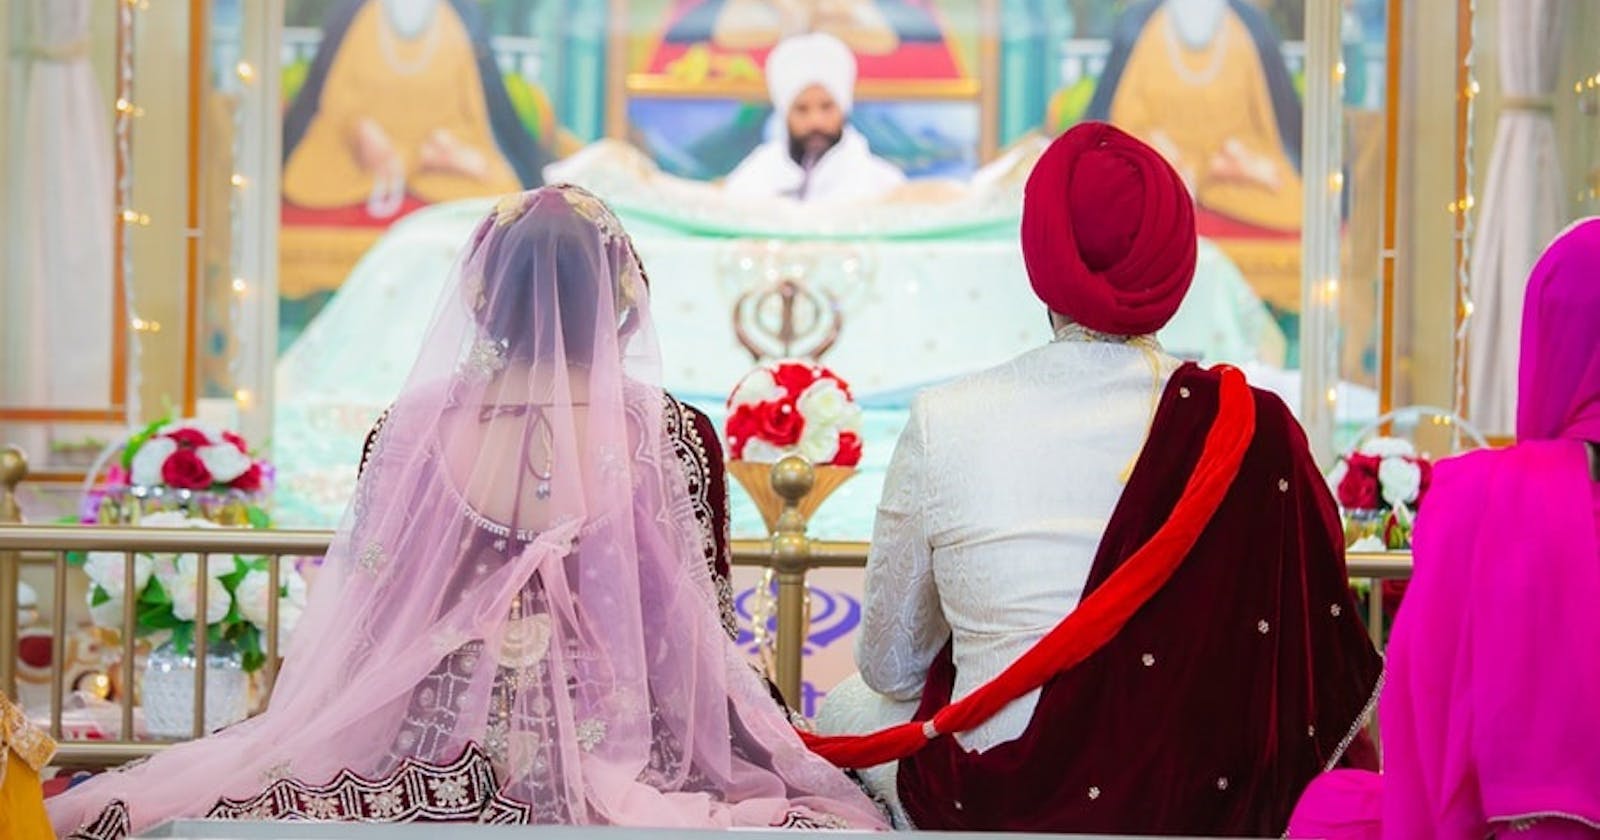 Best ways to find a match in United states for marriage from Sikh community